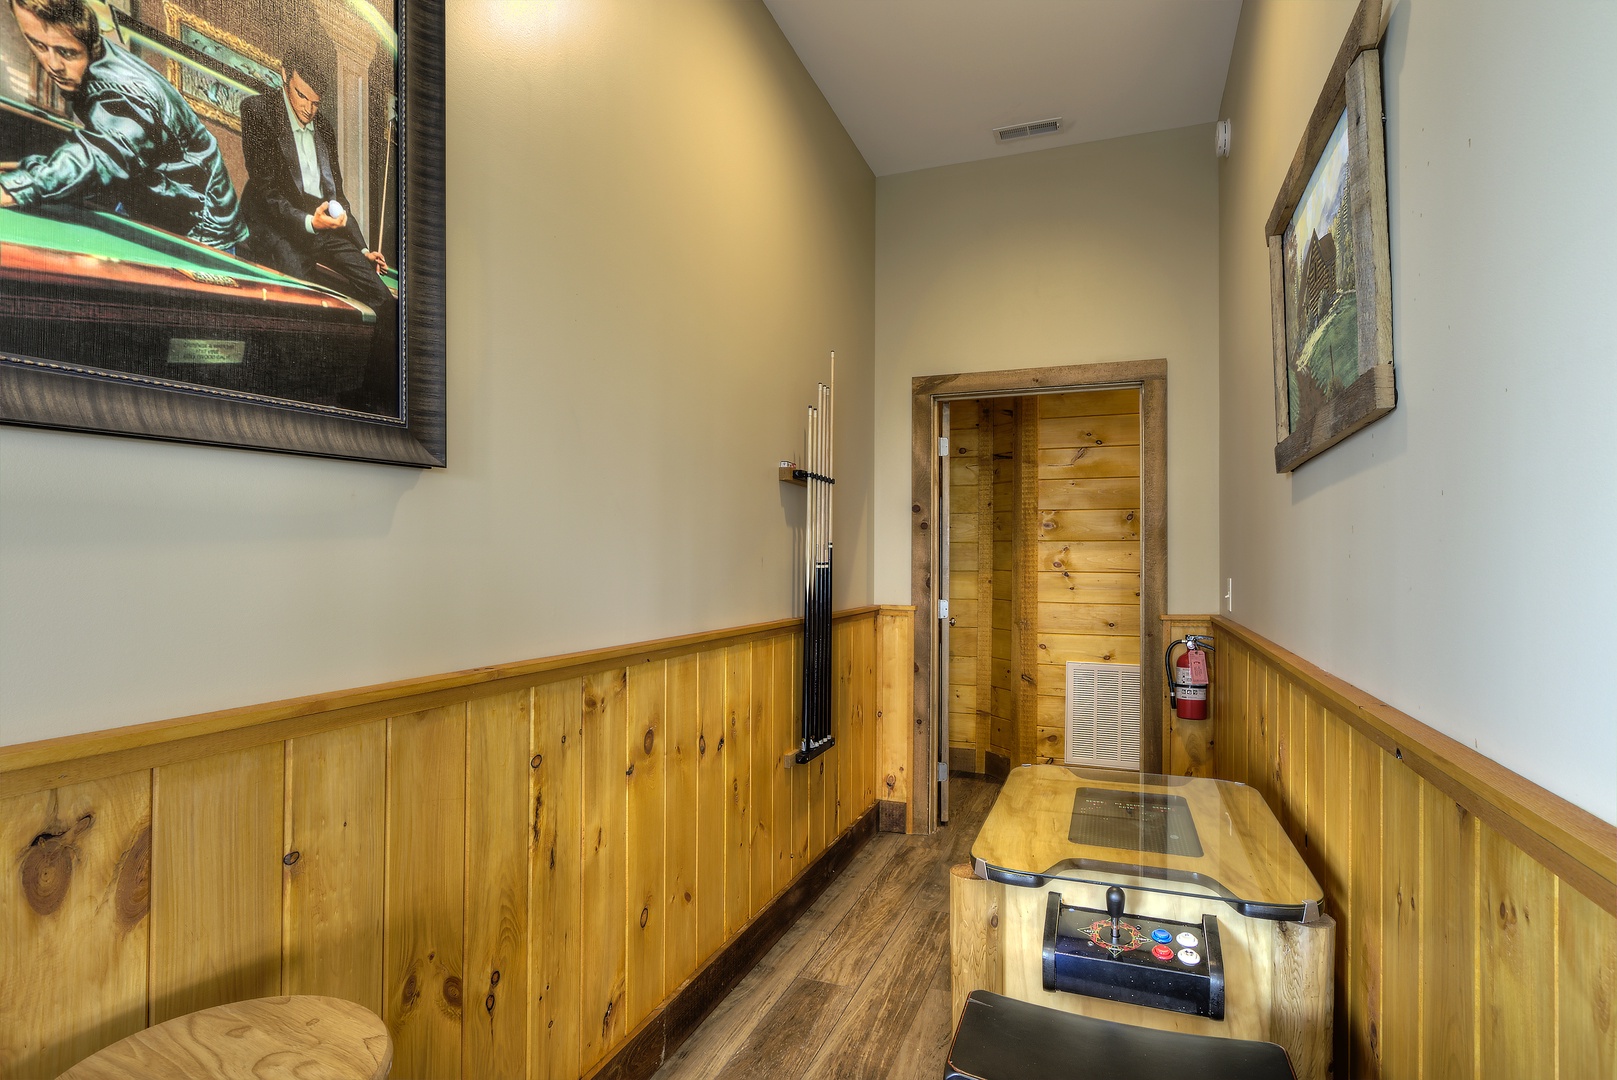 Arcade at The Best View Lodge, a 5 bedroom cabin rental located in gatlinburg